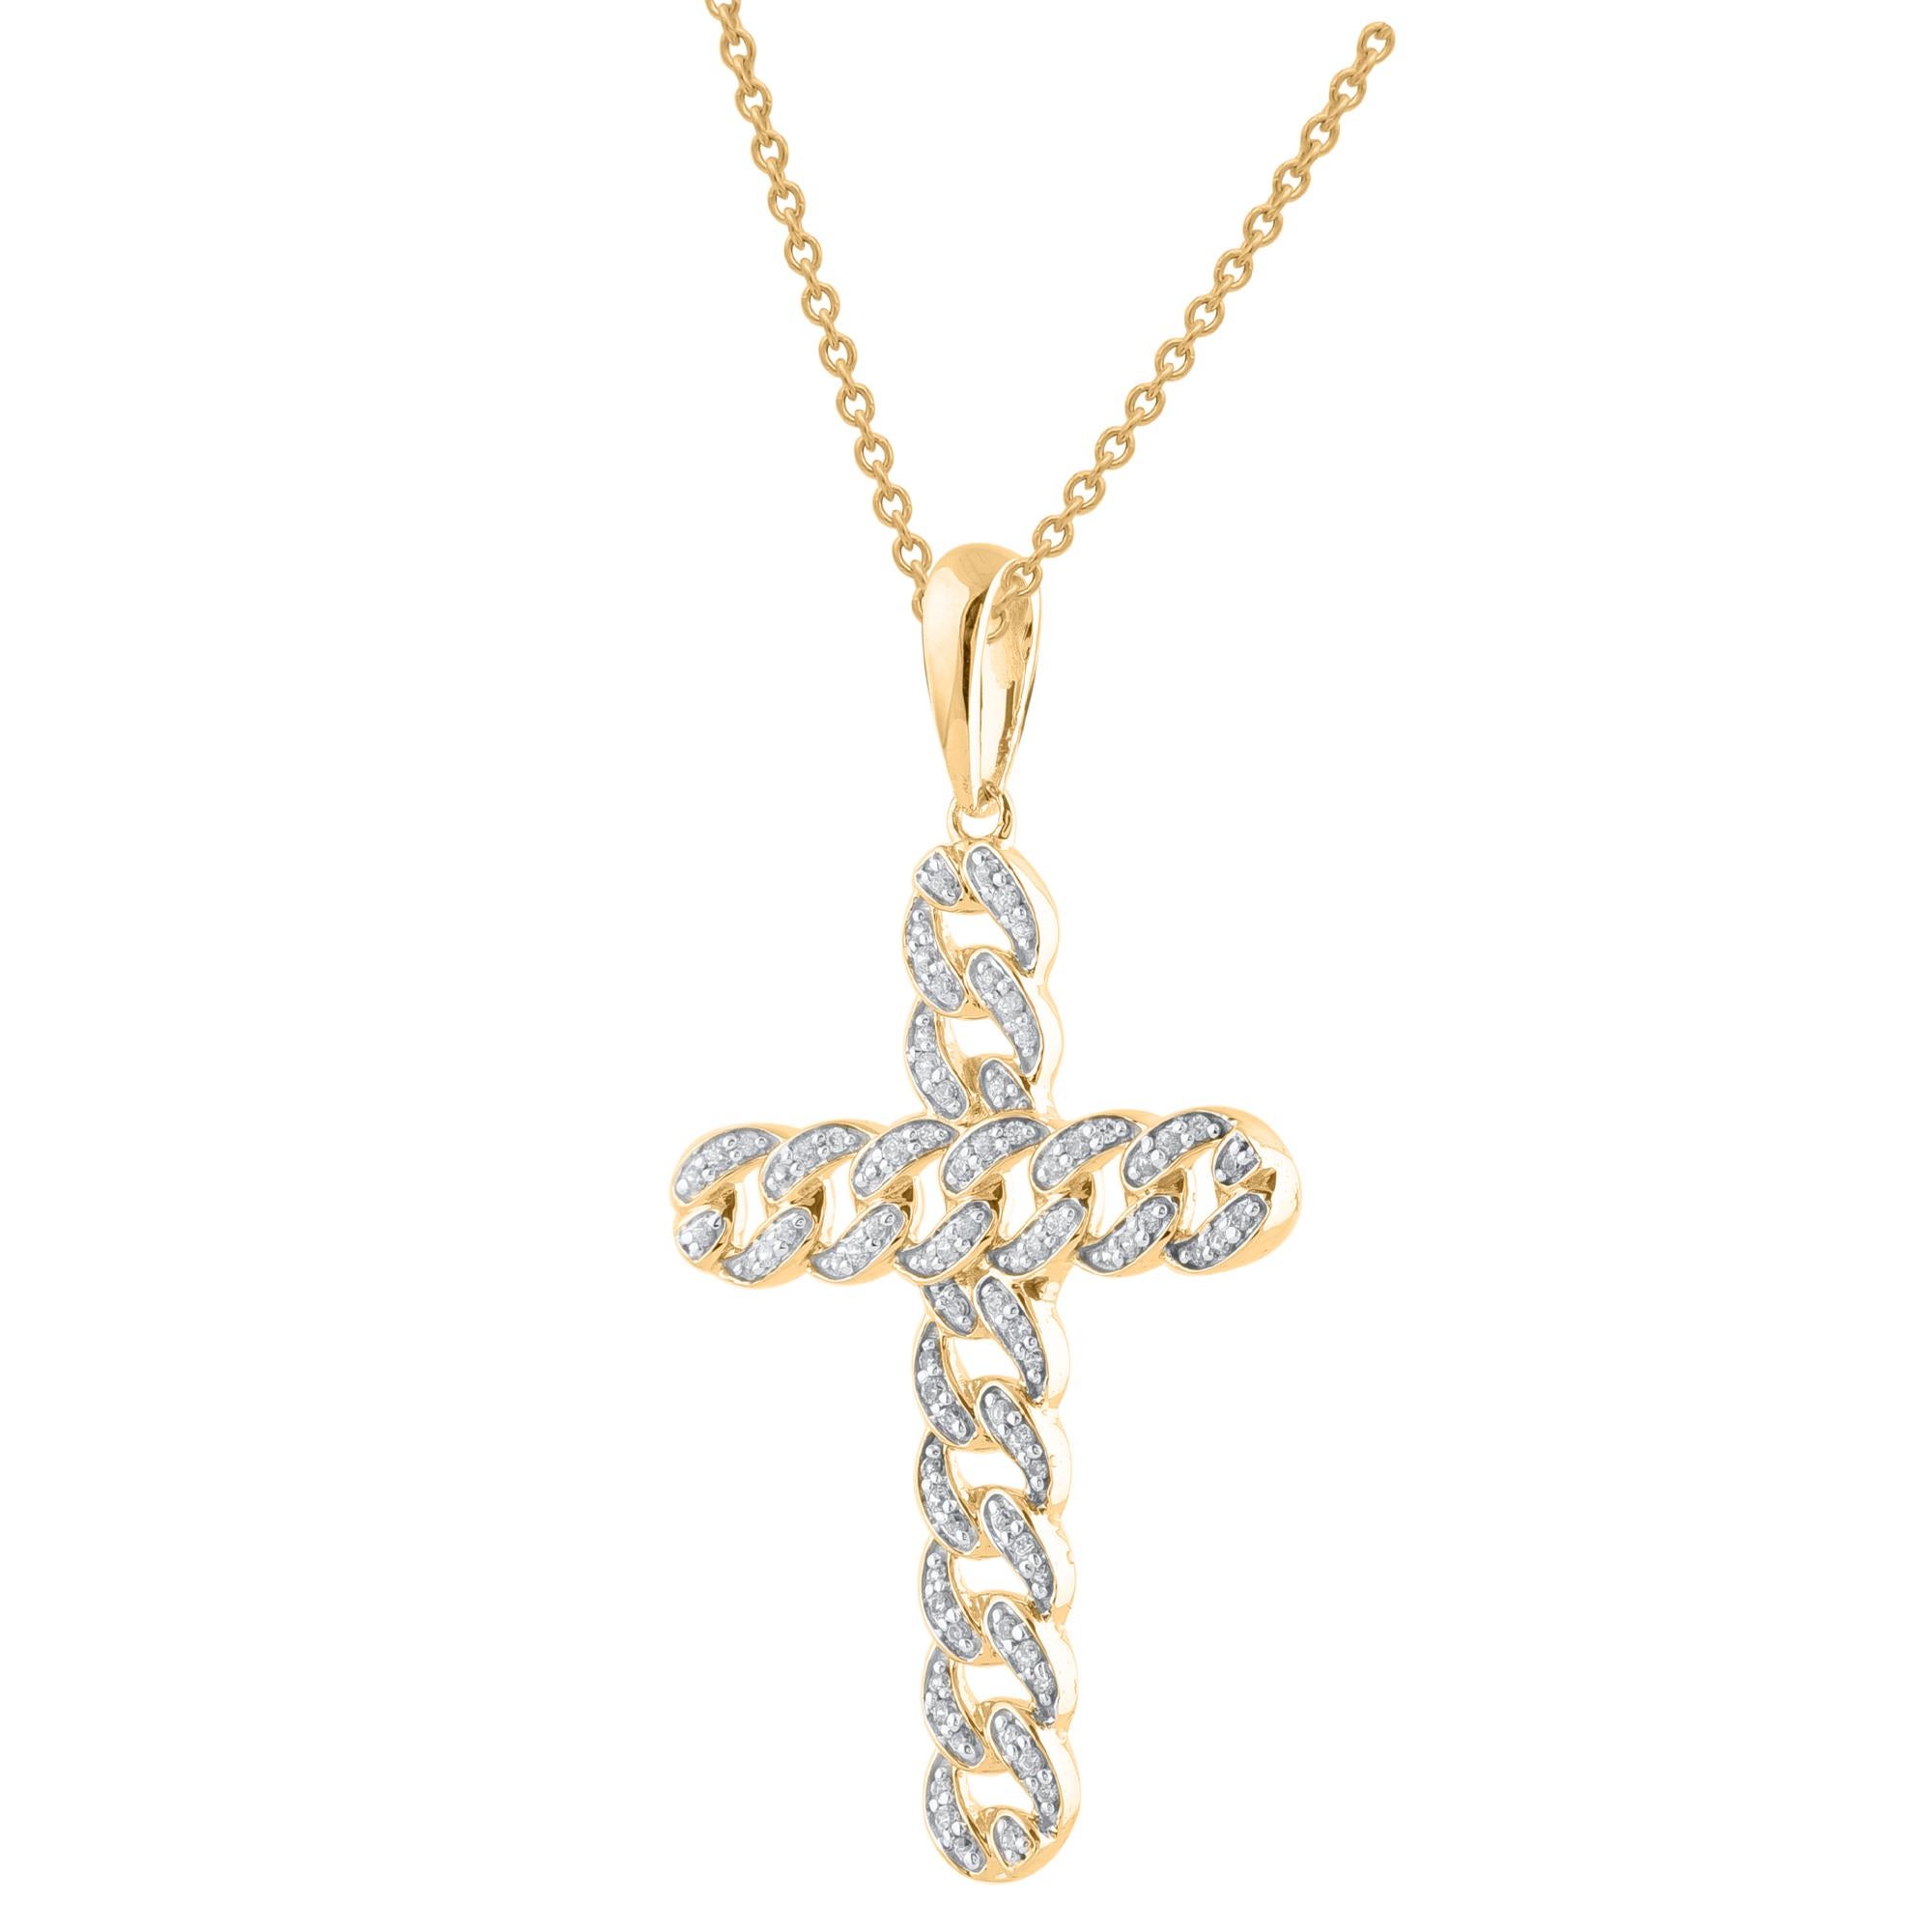 Make a bold statement of style and beliefs with the eye-catching elegance of this diamond cross pendant.  Beautifully crafted by our inhouse experts in 14kt yellow gold and embellished with 84 round diamond set in pave setting. The total diamond